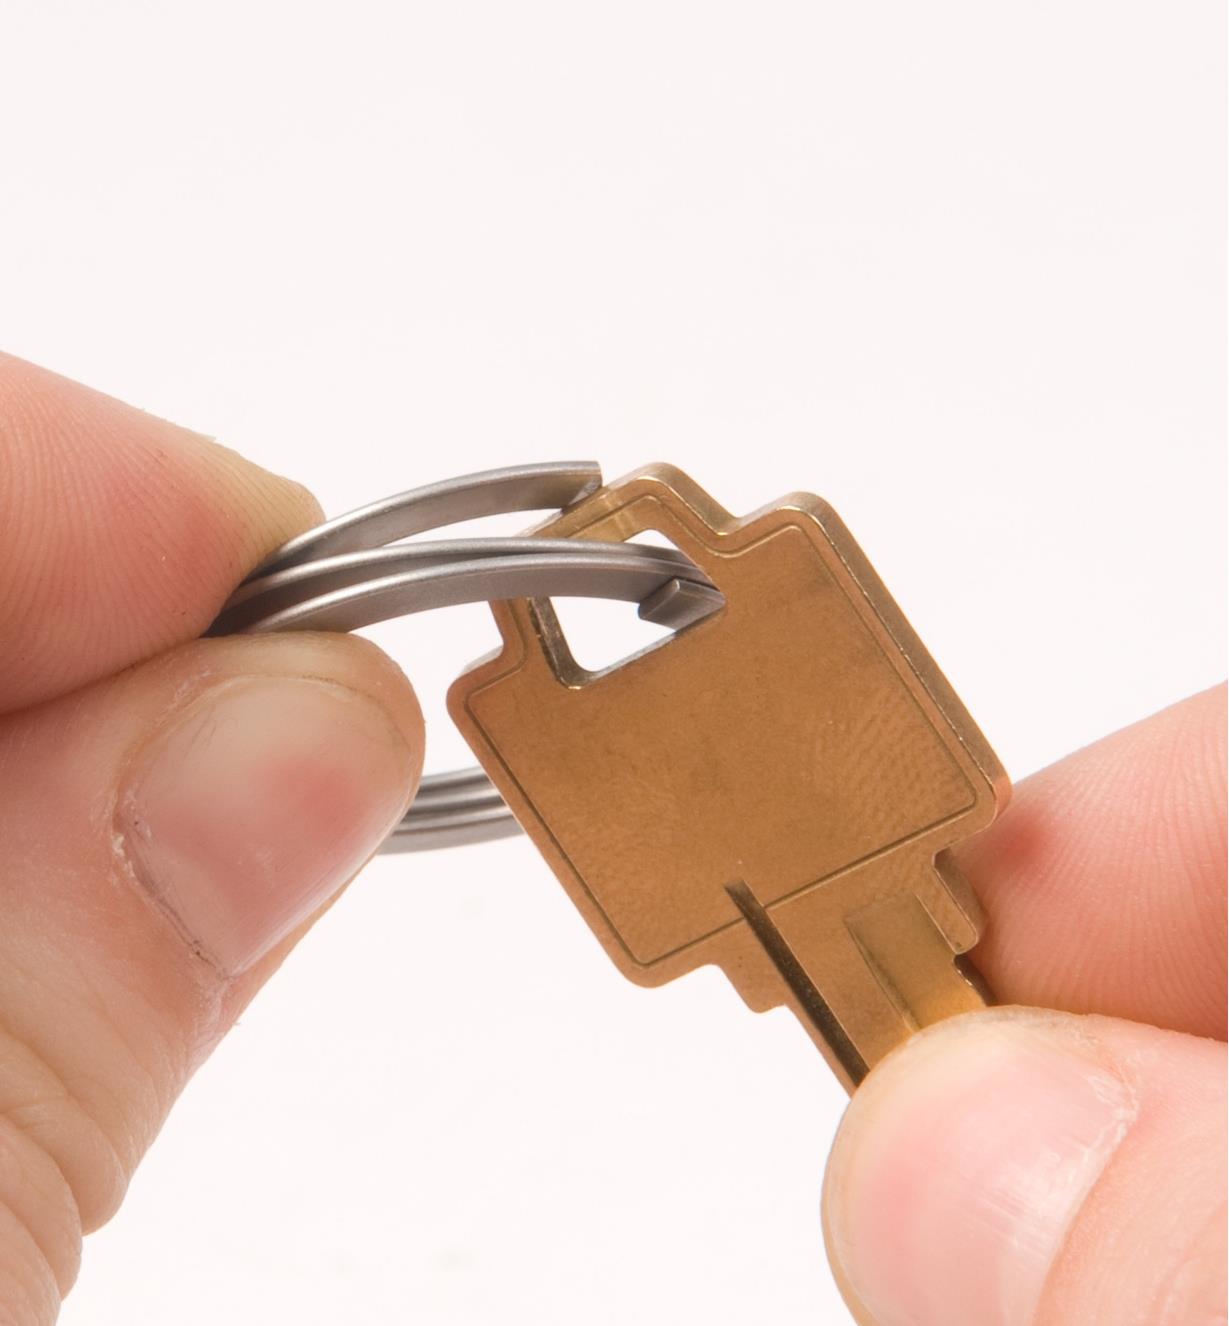 FreeKey key ring with key attached